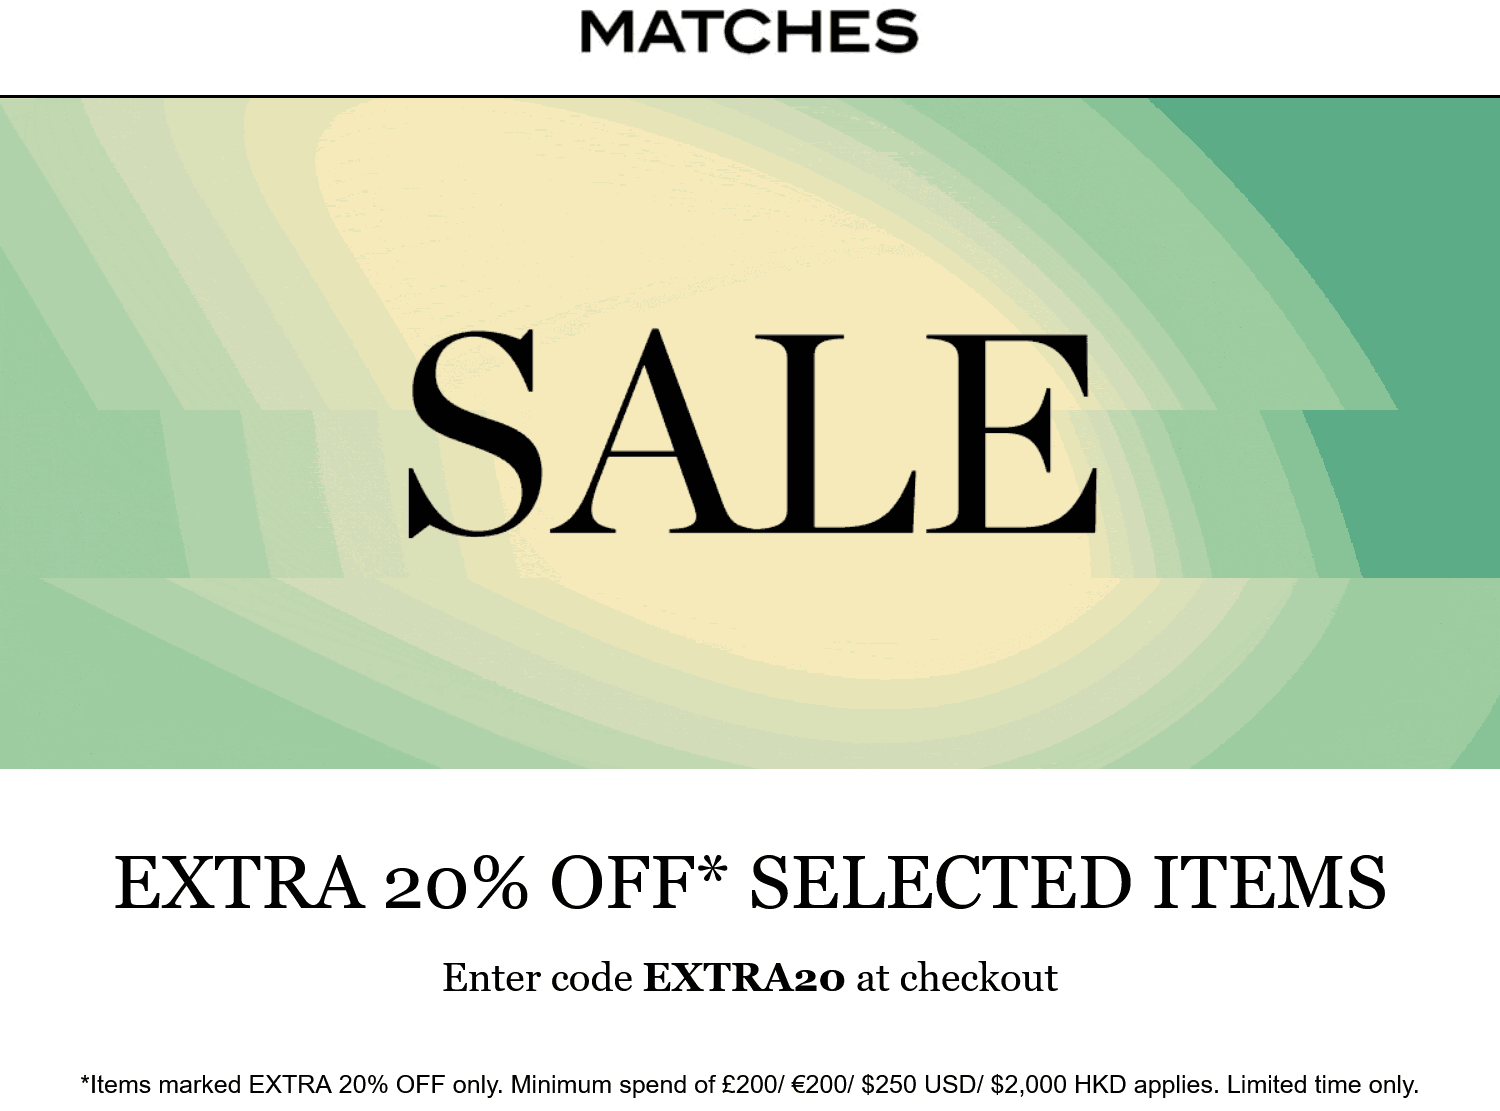 Matches stores Coupon  Extra 20% off at Matches via promo code EXTRA20 #matches 